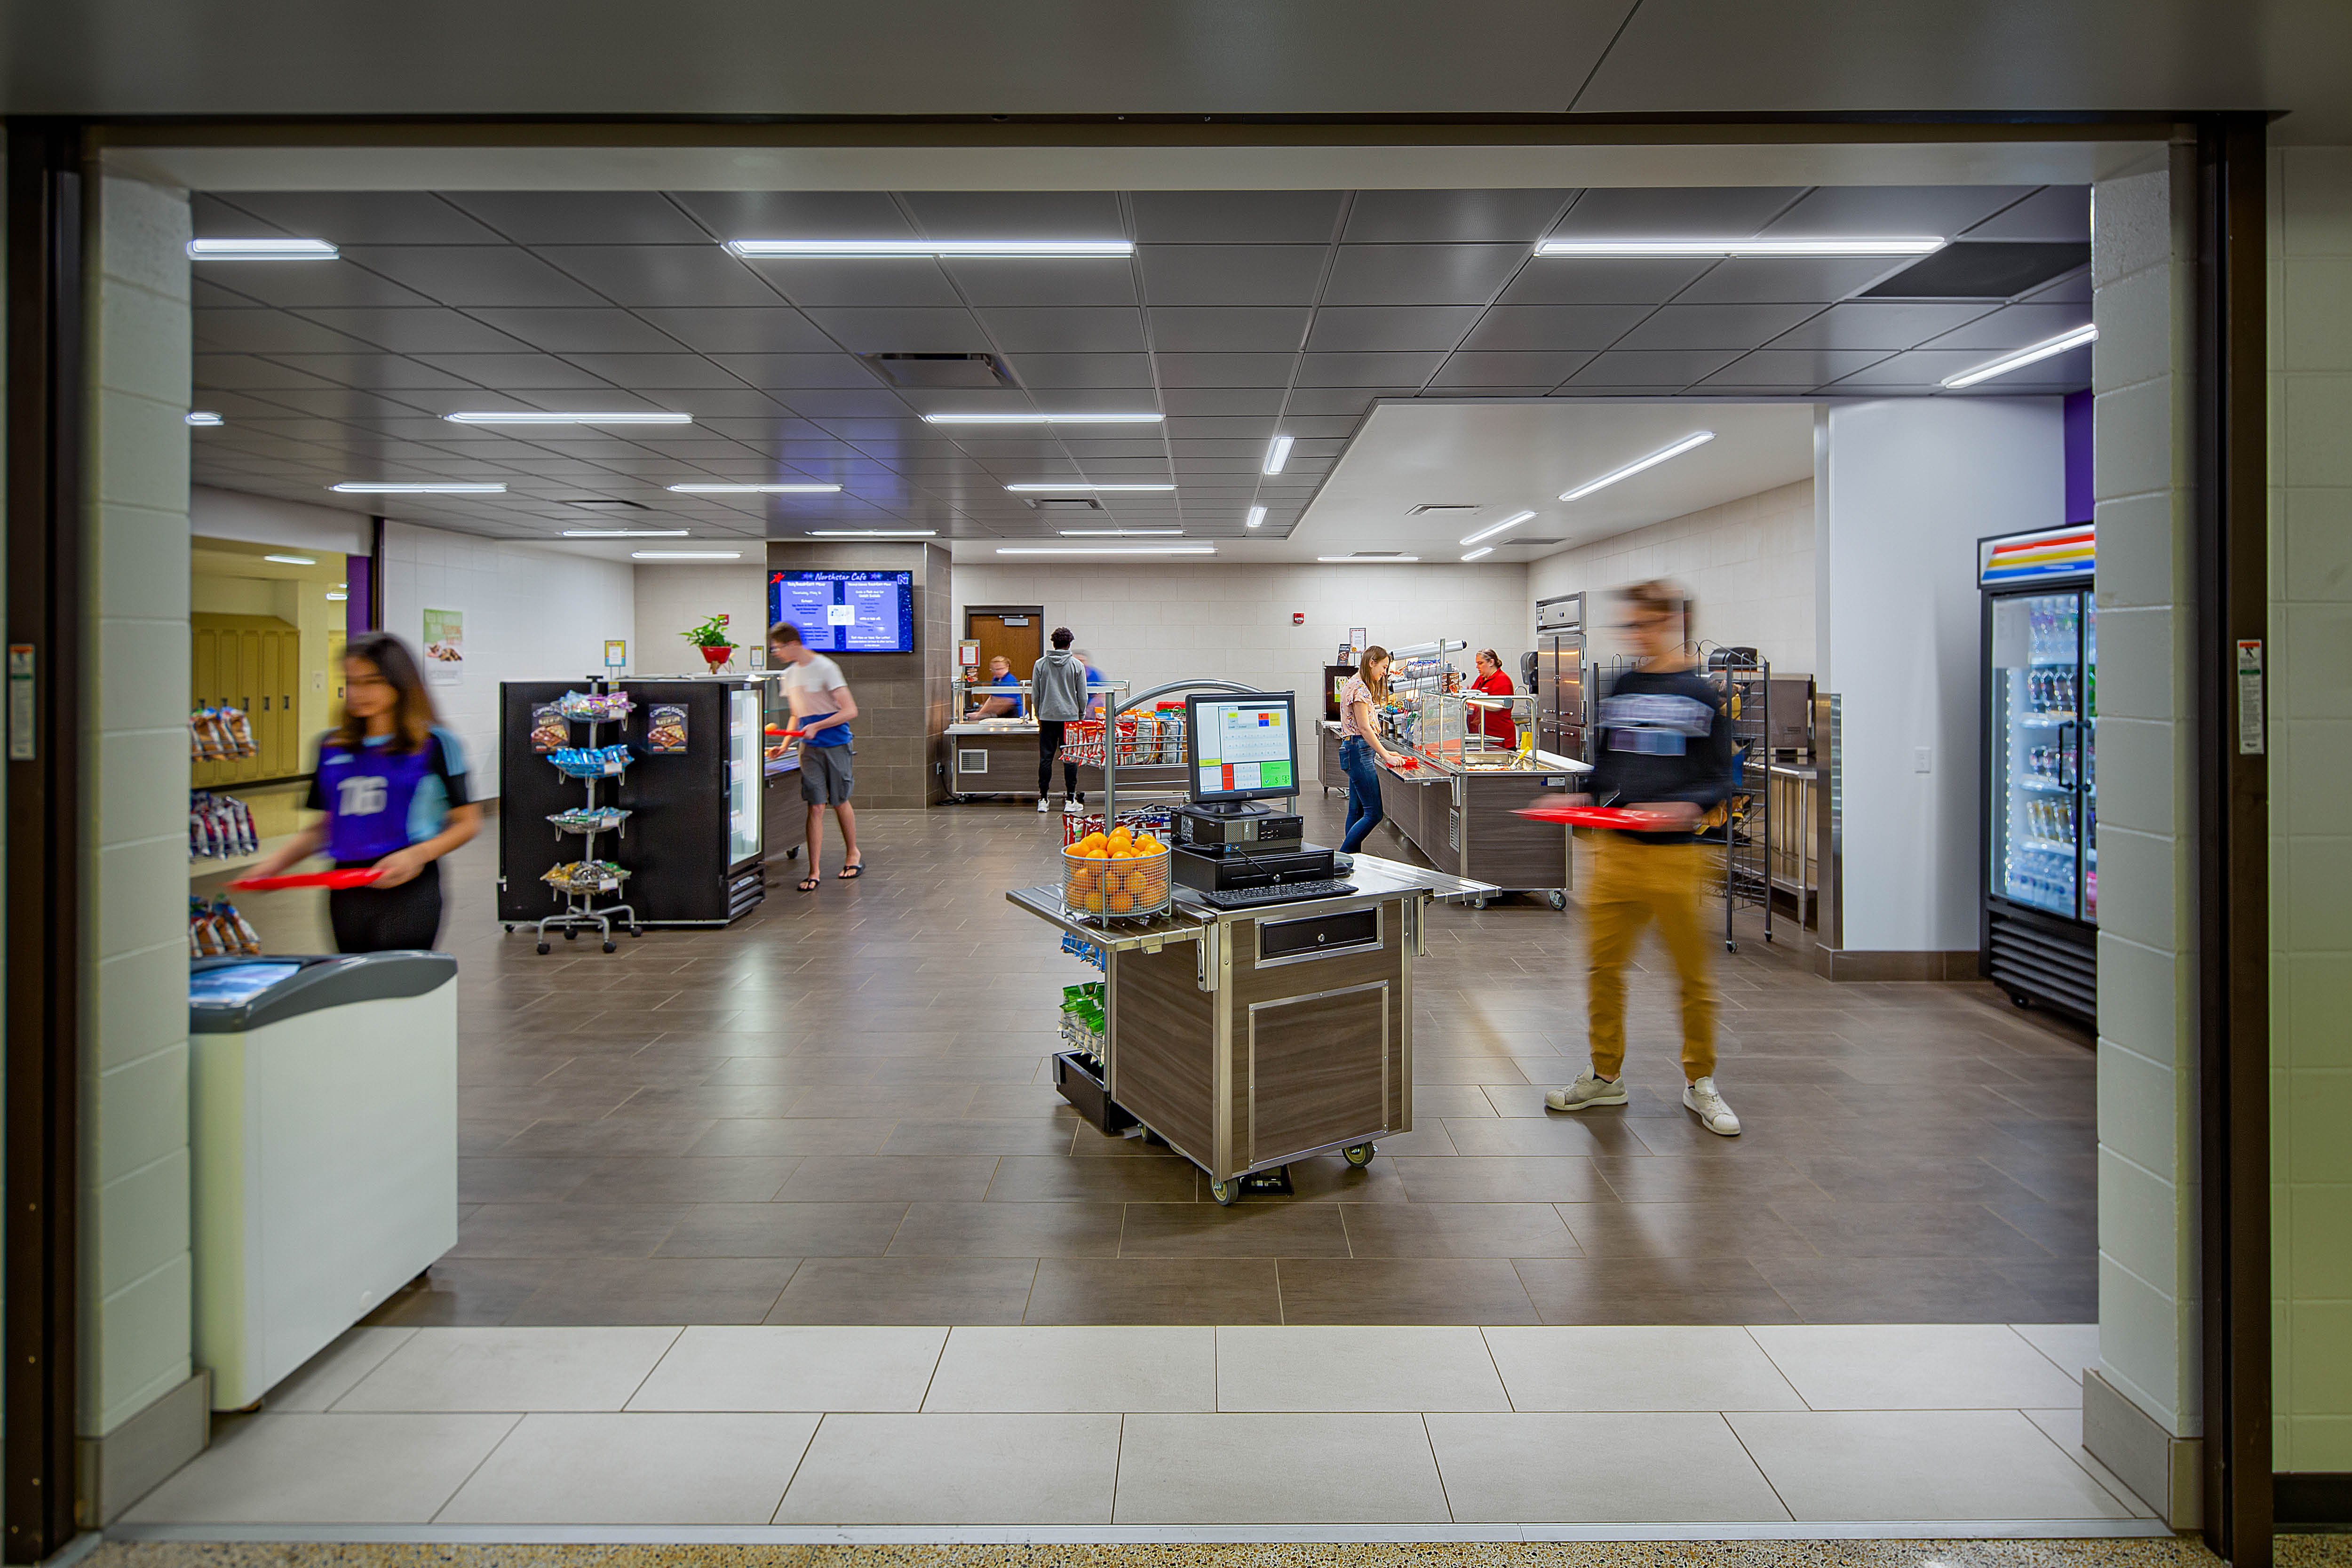 Waukesha North Kitchen Commons and Servery designed by Bray Architects